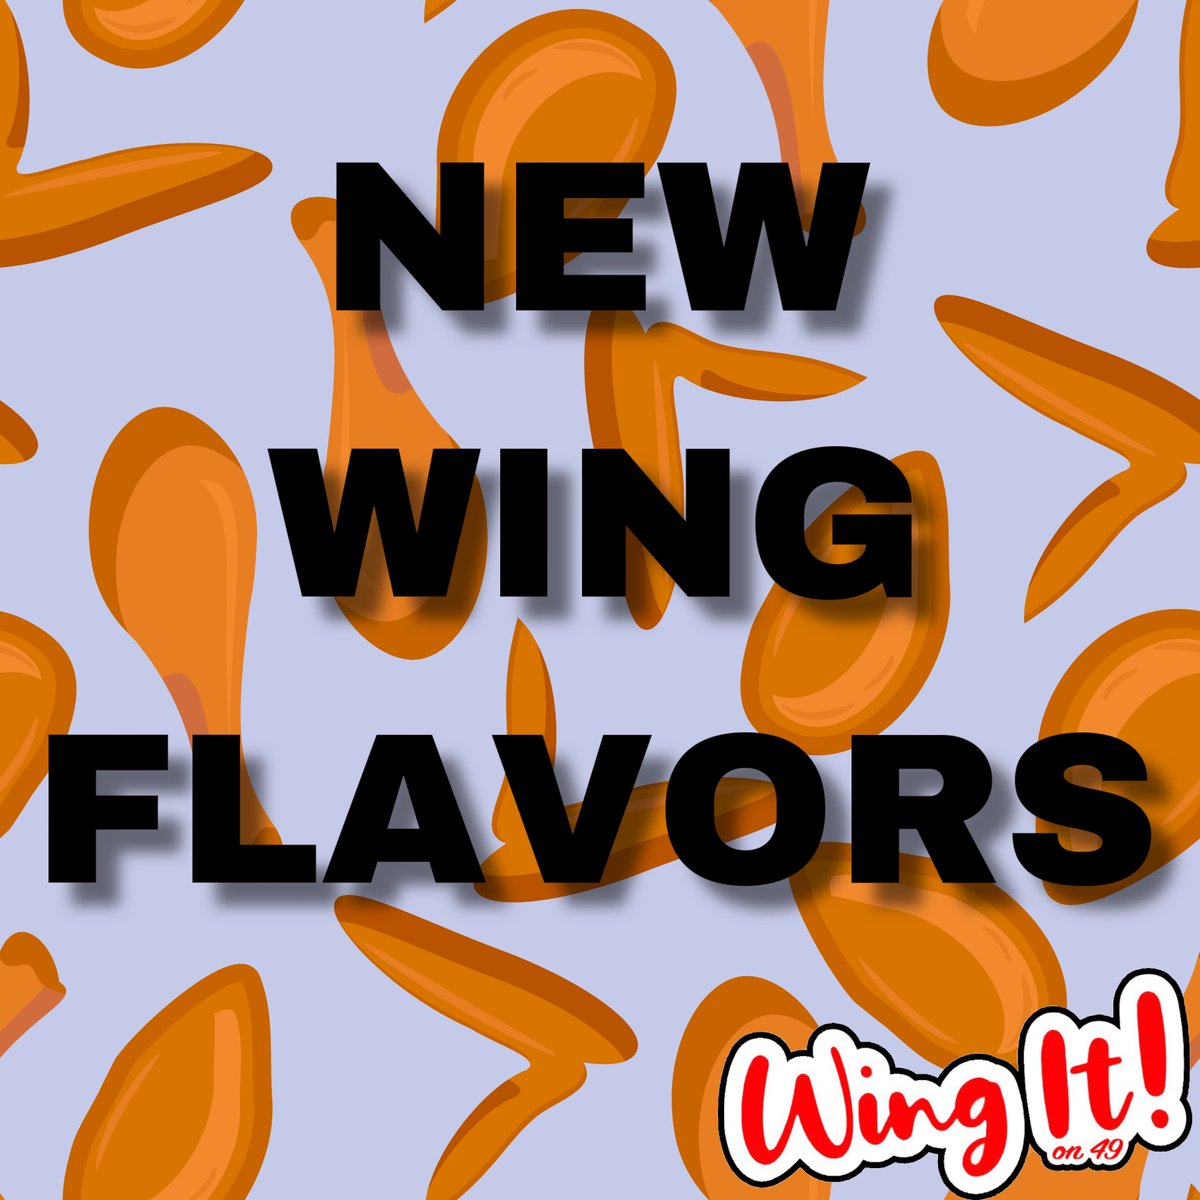 We just added 2 new Wing flavors!!! Peach Habanero & also Korean BBQ!!! Come in and give them a try, just might be your new favorite! #BestWingsInAmadorCounty #WingItOn49 #AmadorCounty #JacksonCA #HotWings #HappyFriday #NewFlavors #WingIt #PeachHabaneroWings #KoreanBBQWings